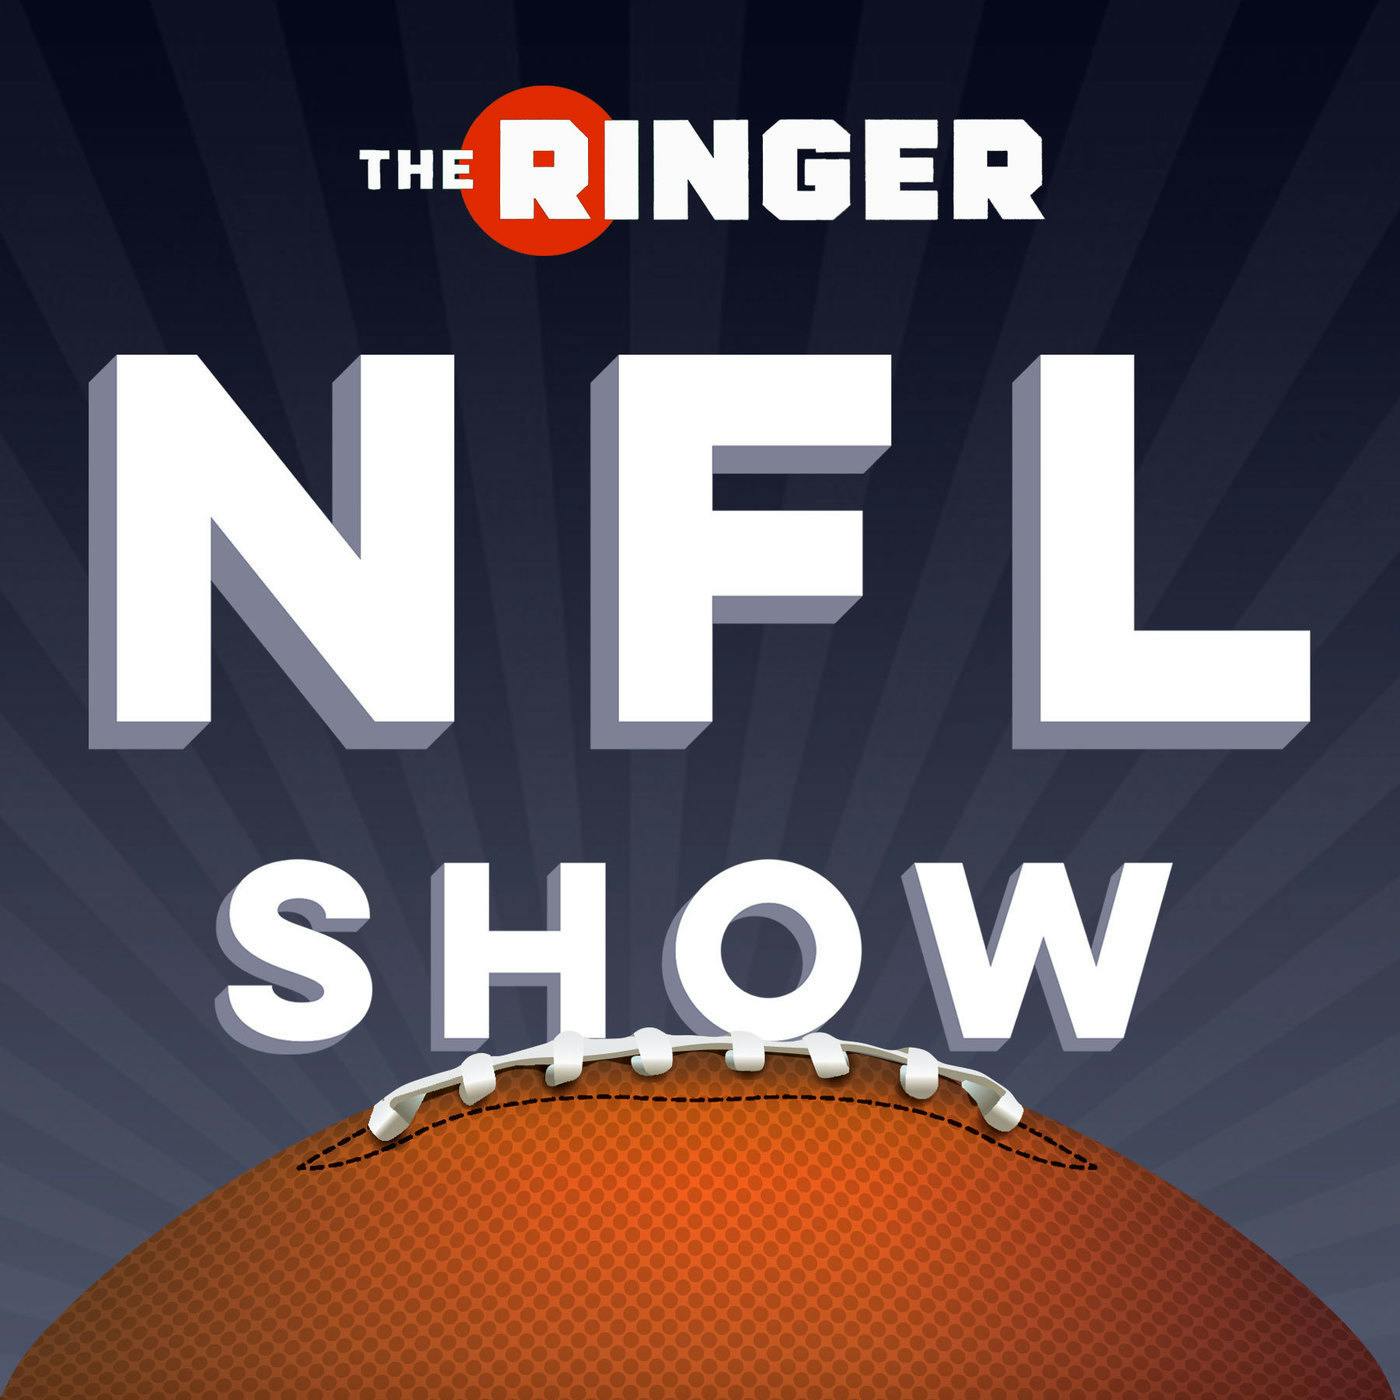 The Double Doink Game | The Ringer NFL Show (Ep. 378)